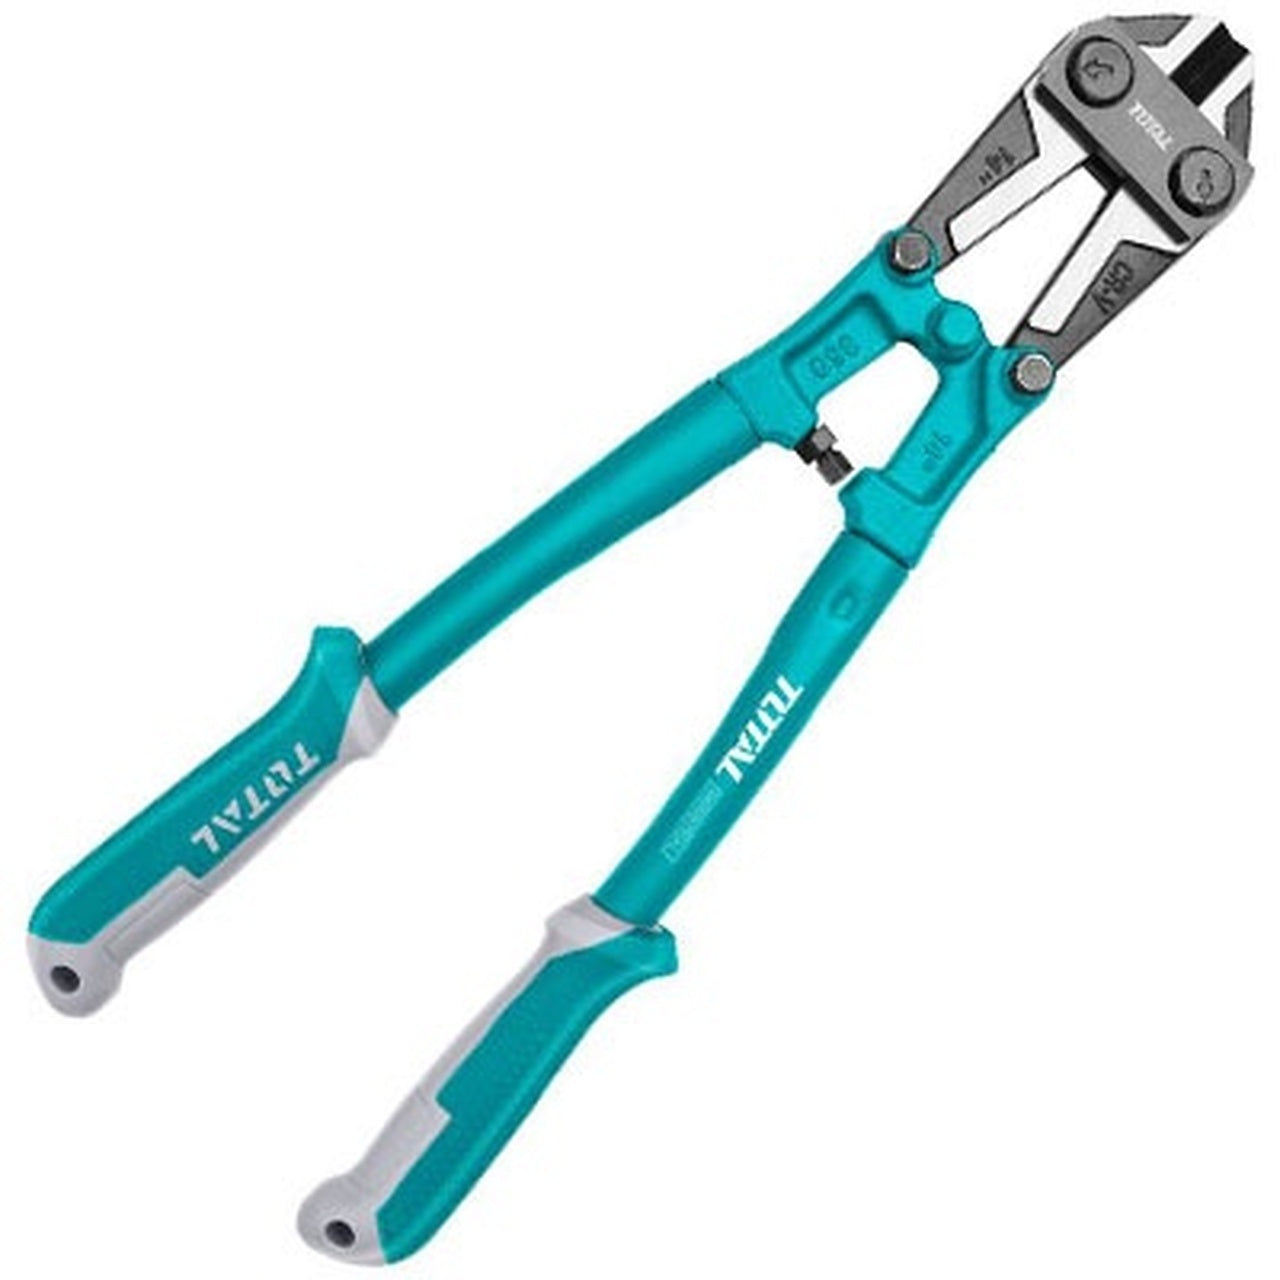 total tht113486 bolt cutter Price in Pakistan